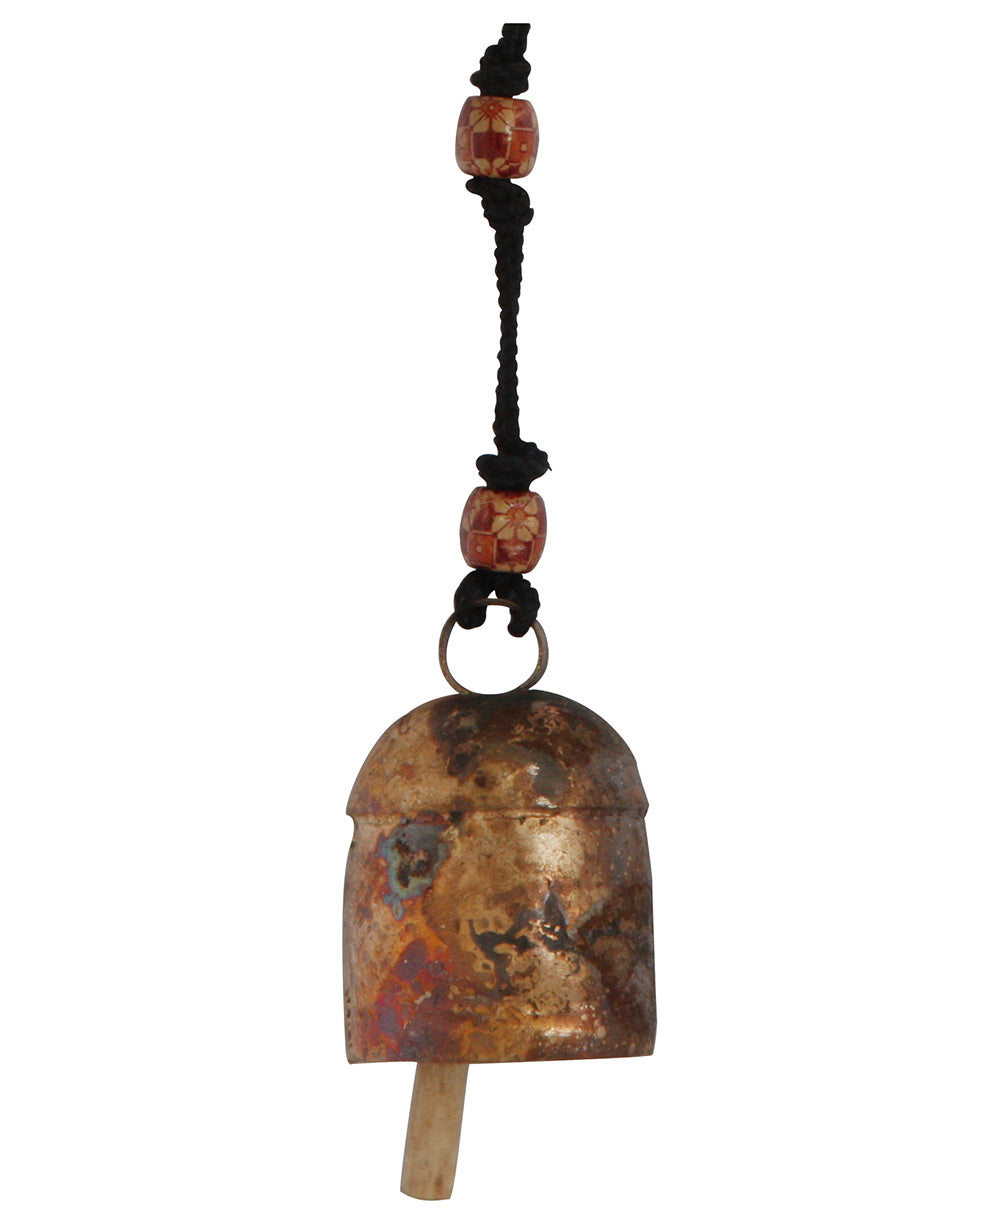 Handmade Copper Bell Chime - Small